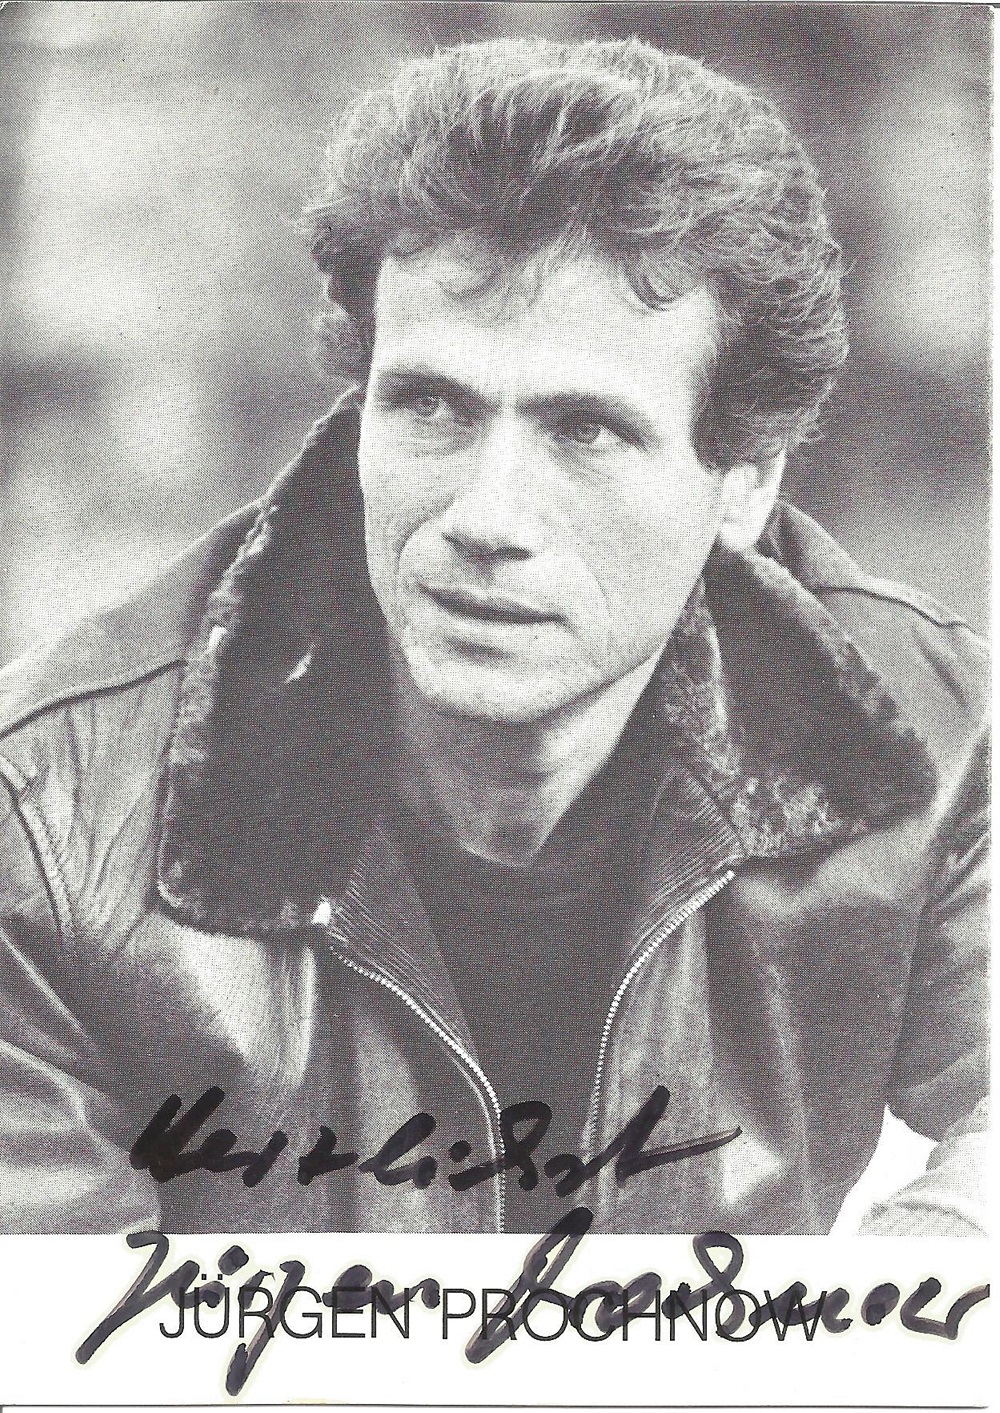 Jurgen Prochnow signed 6x4 black and white photo. German-American actor. His best-known roles